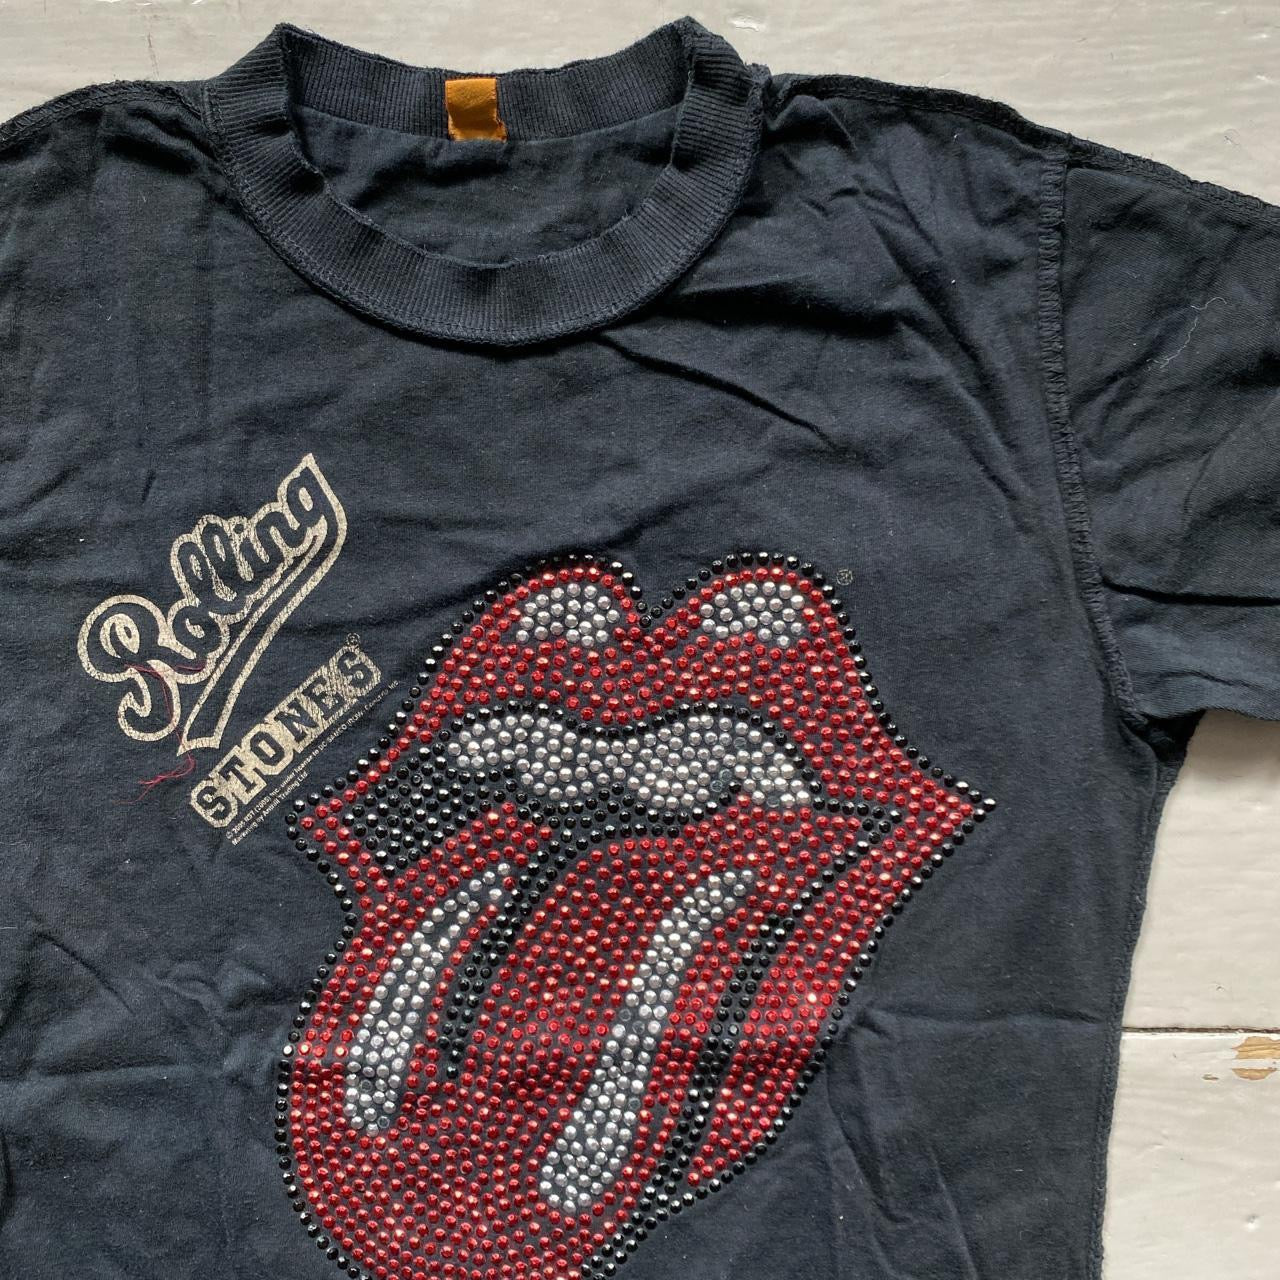 Rolling Stones T Shirt (Small)